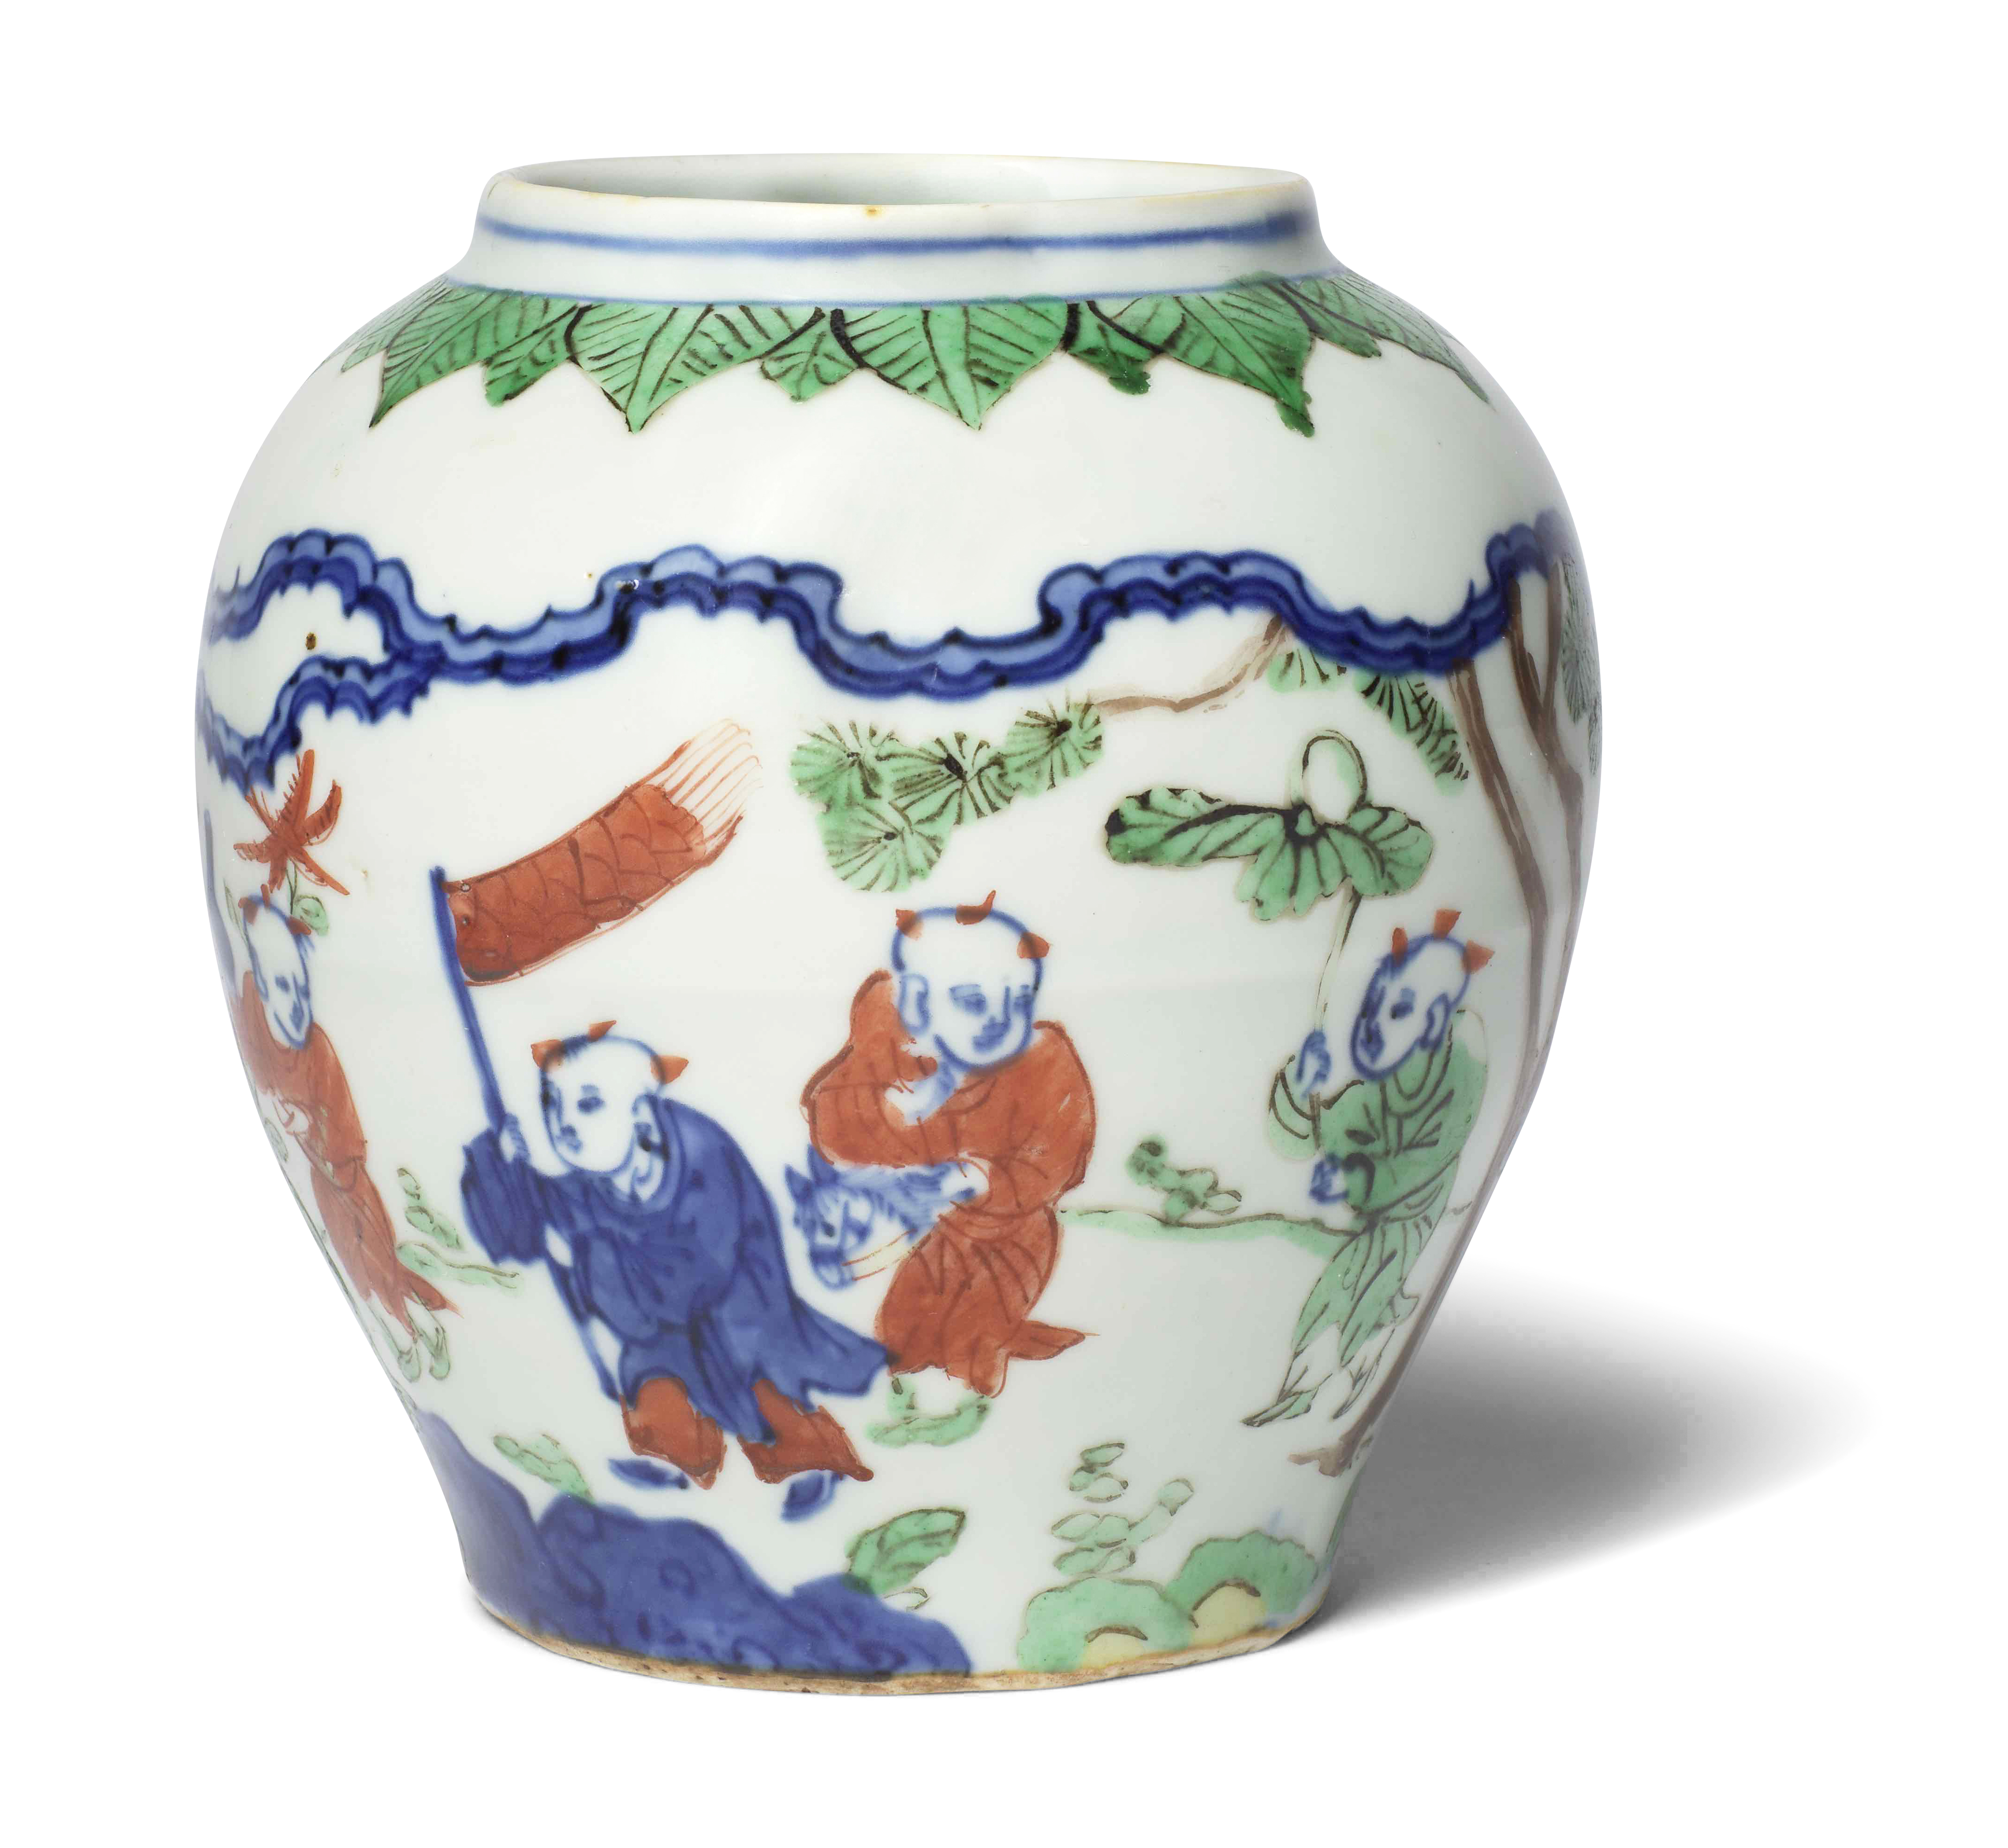 A VERY RARE IMPERIAL WUCAI 'BOYS' JAR Wanli six-character mark and of the period